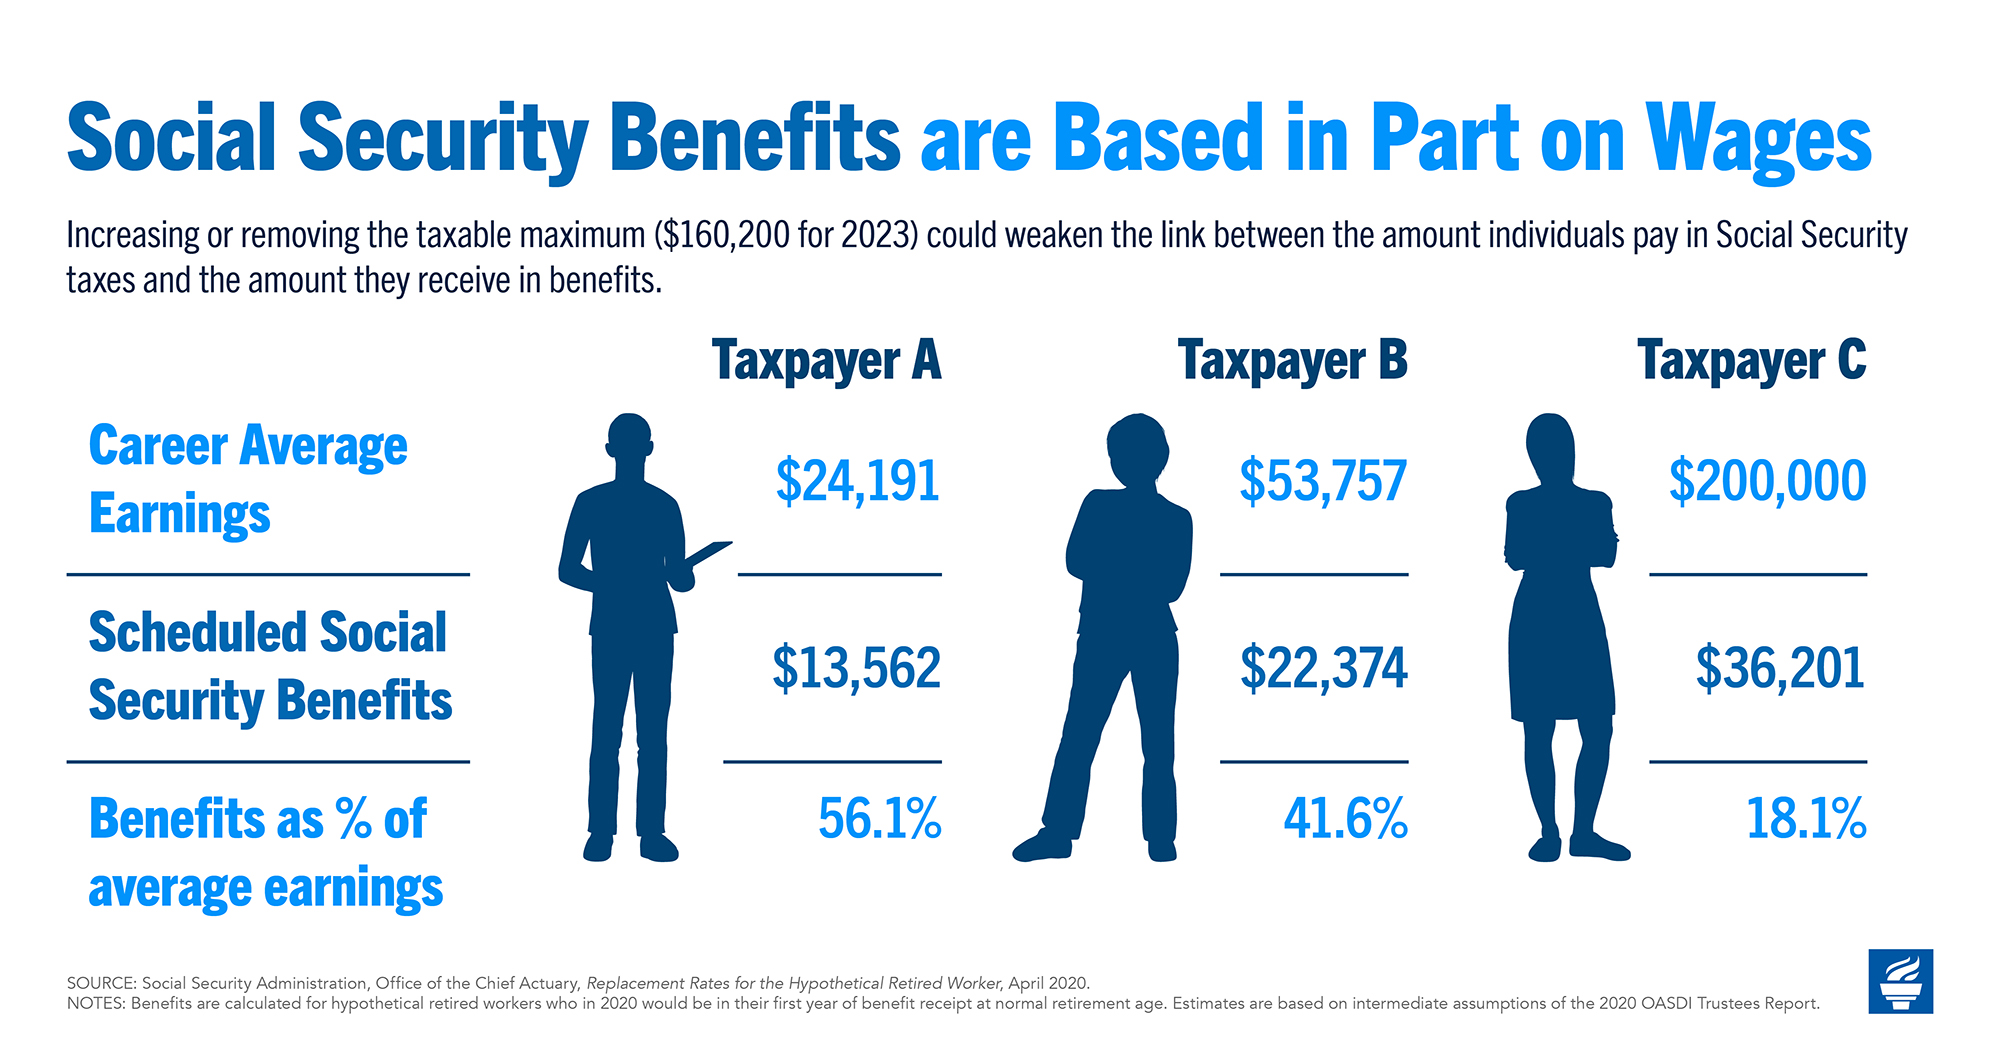 Social Security Benefits are Based in Part on Wages